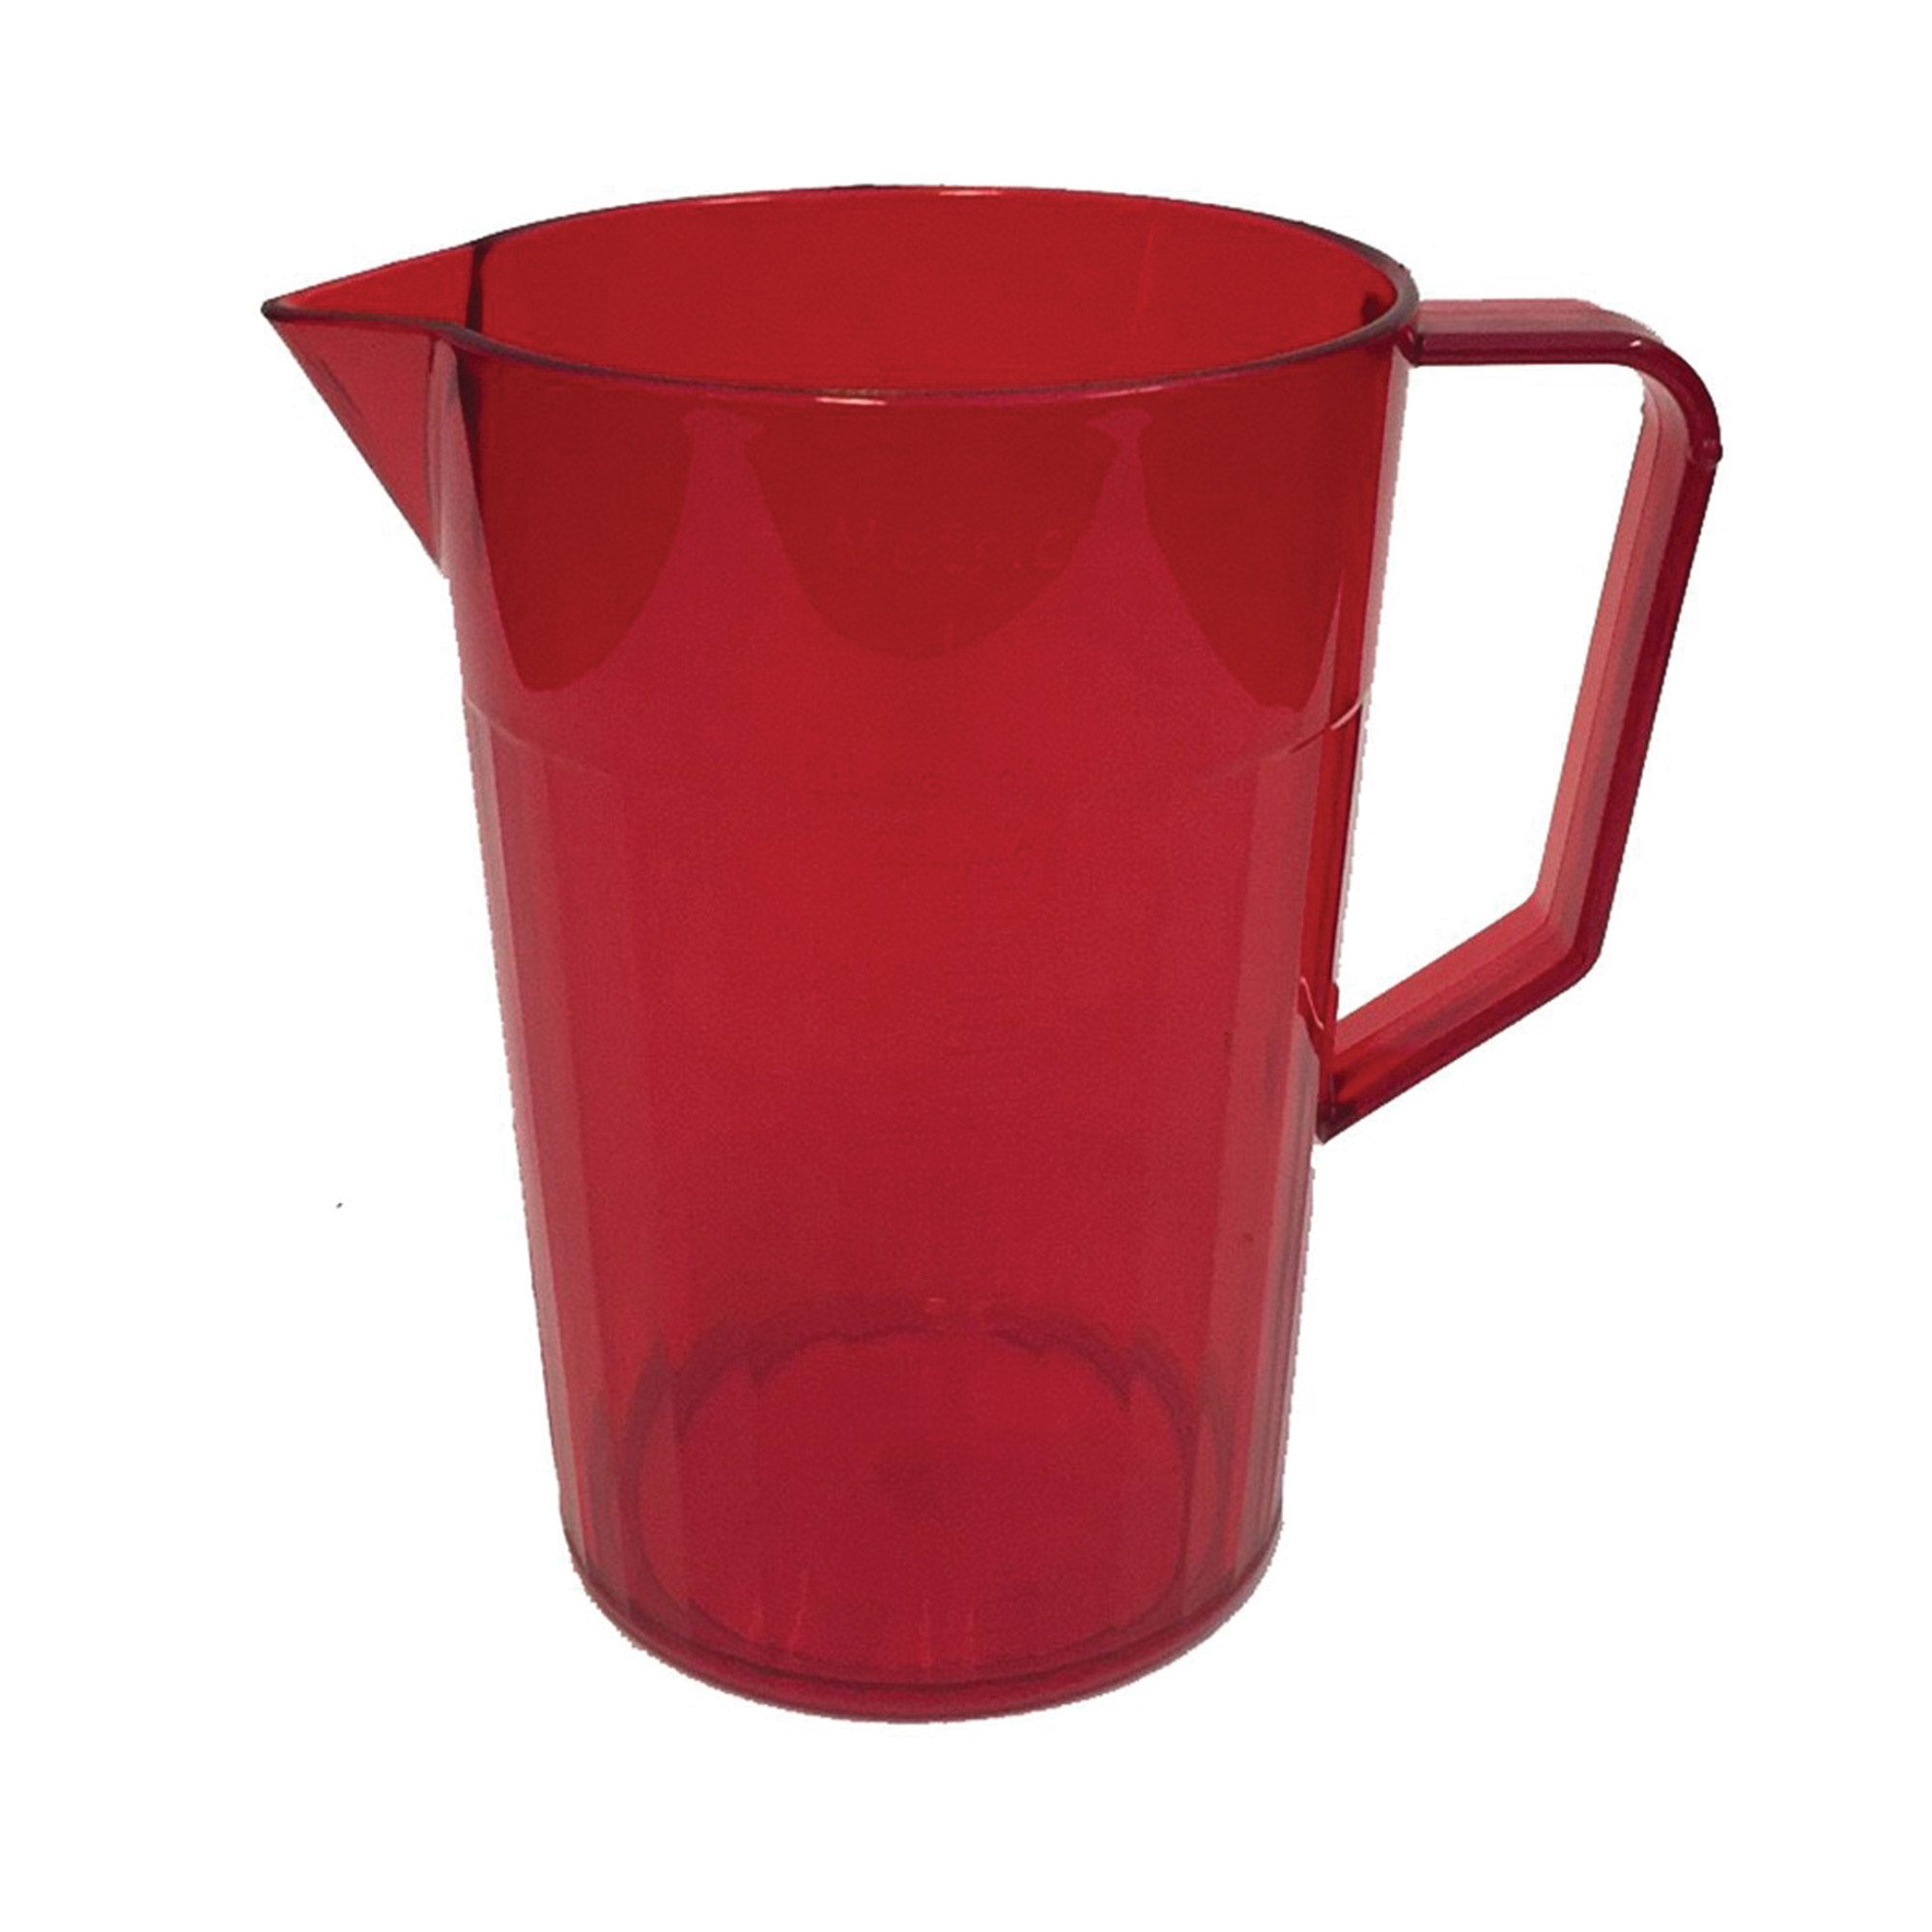 750ml Copolyester Jug Translucent RED - Each